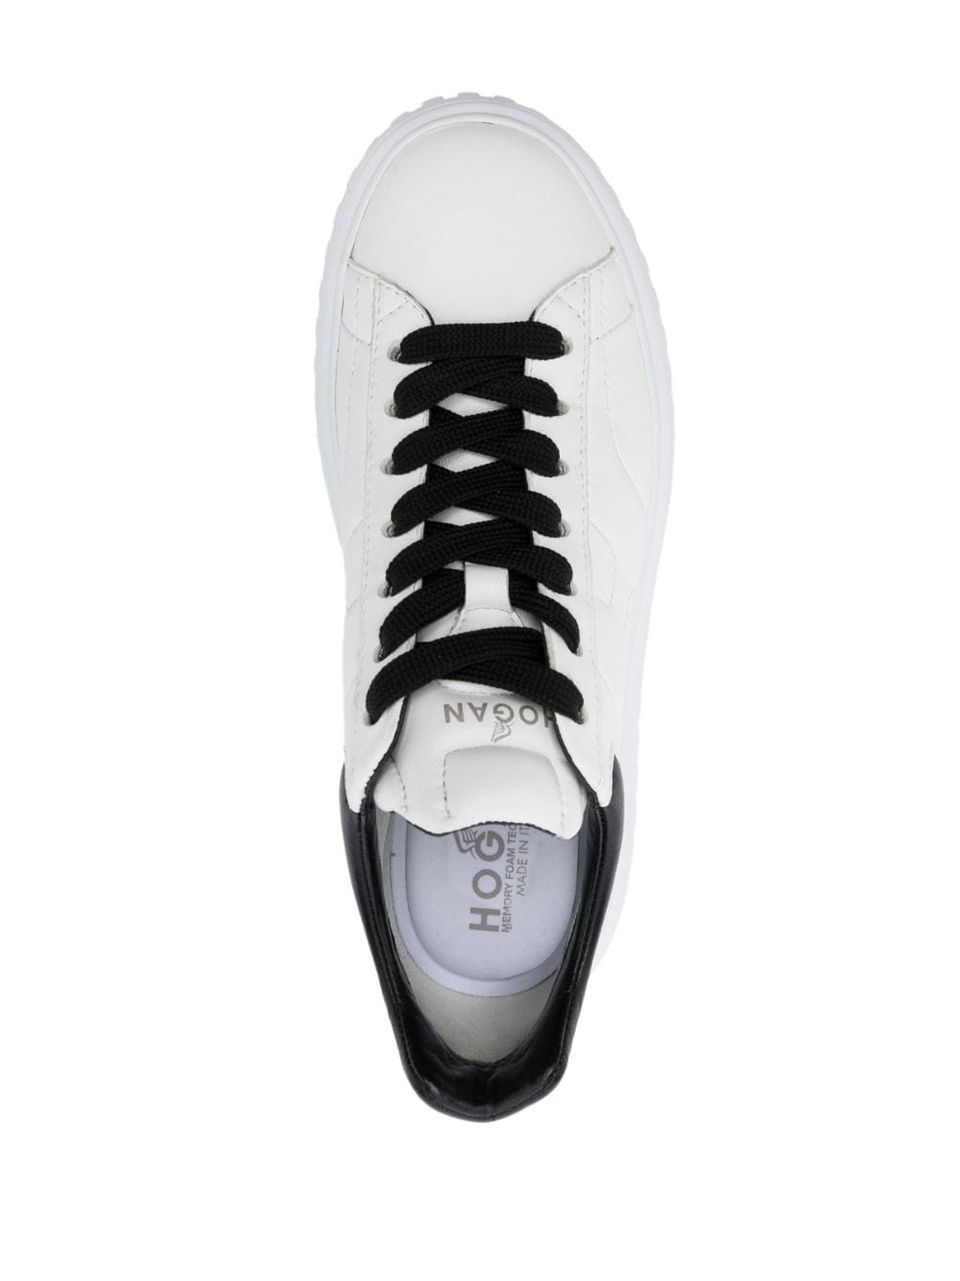 'Hogan H-Stripes' in leather sneakers